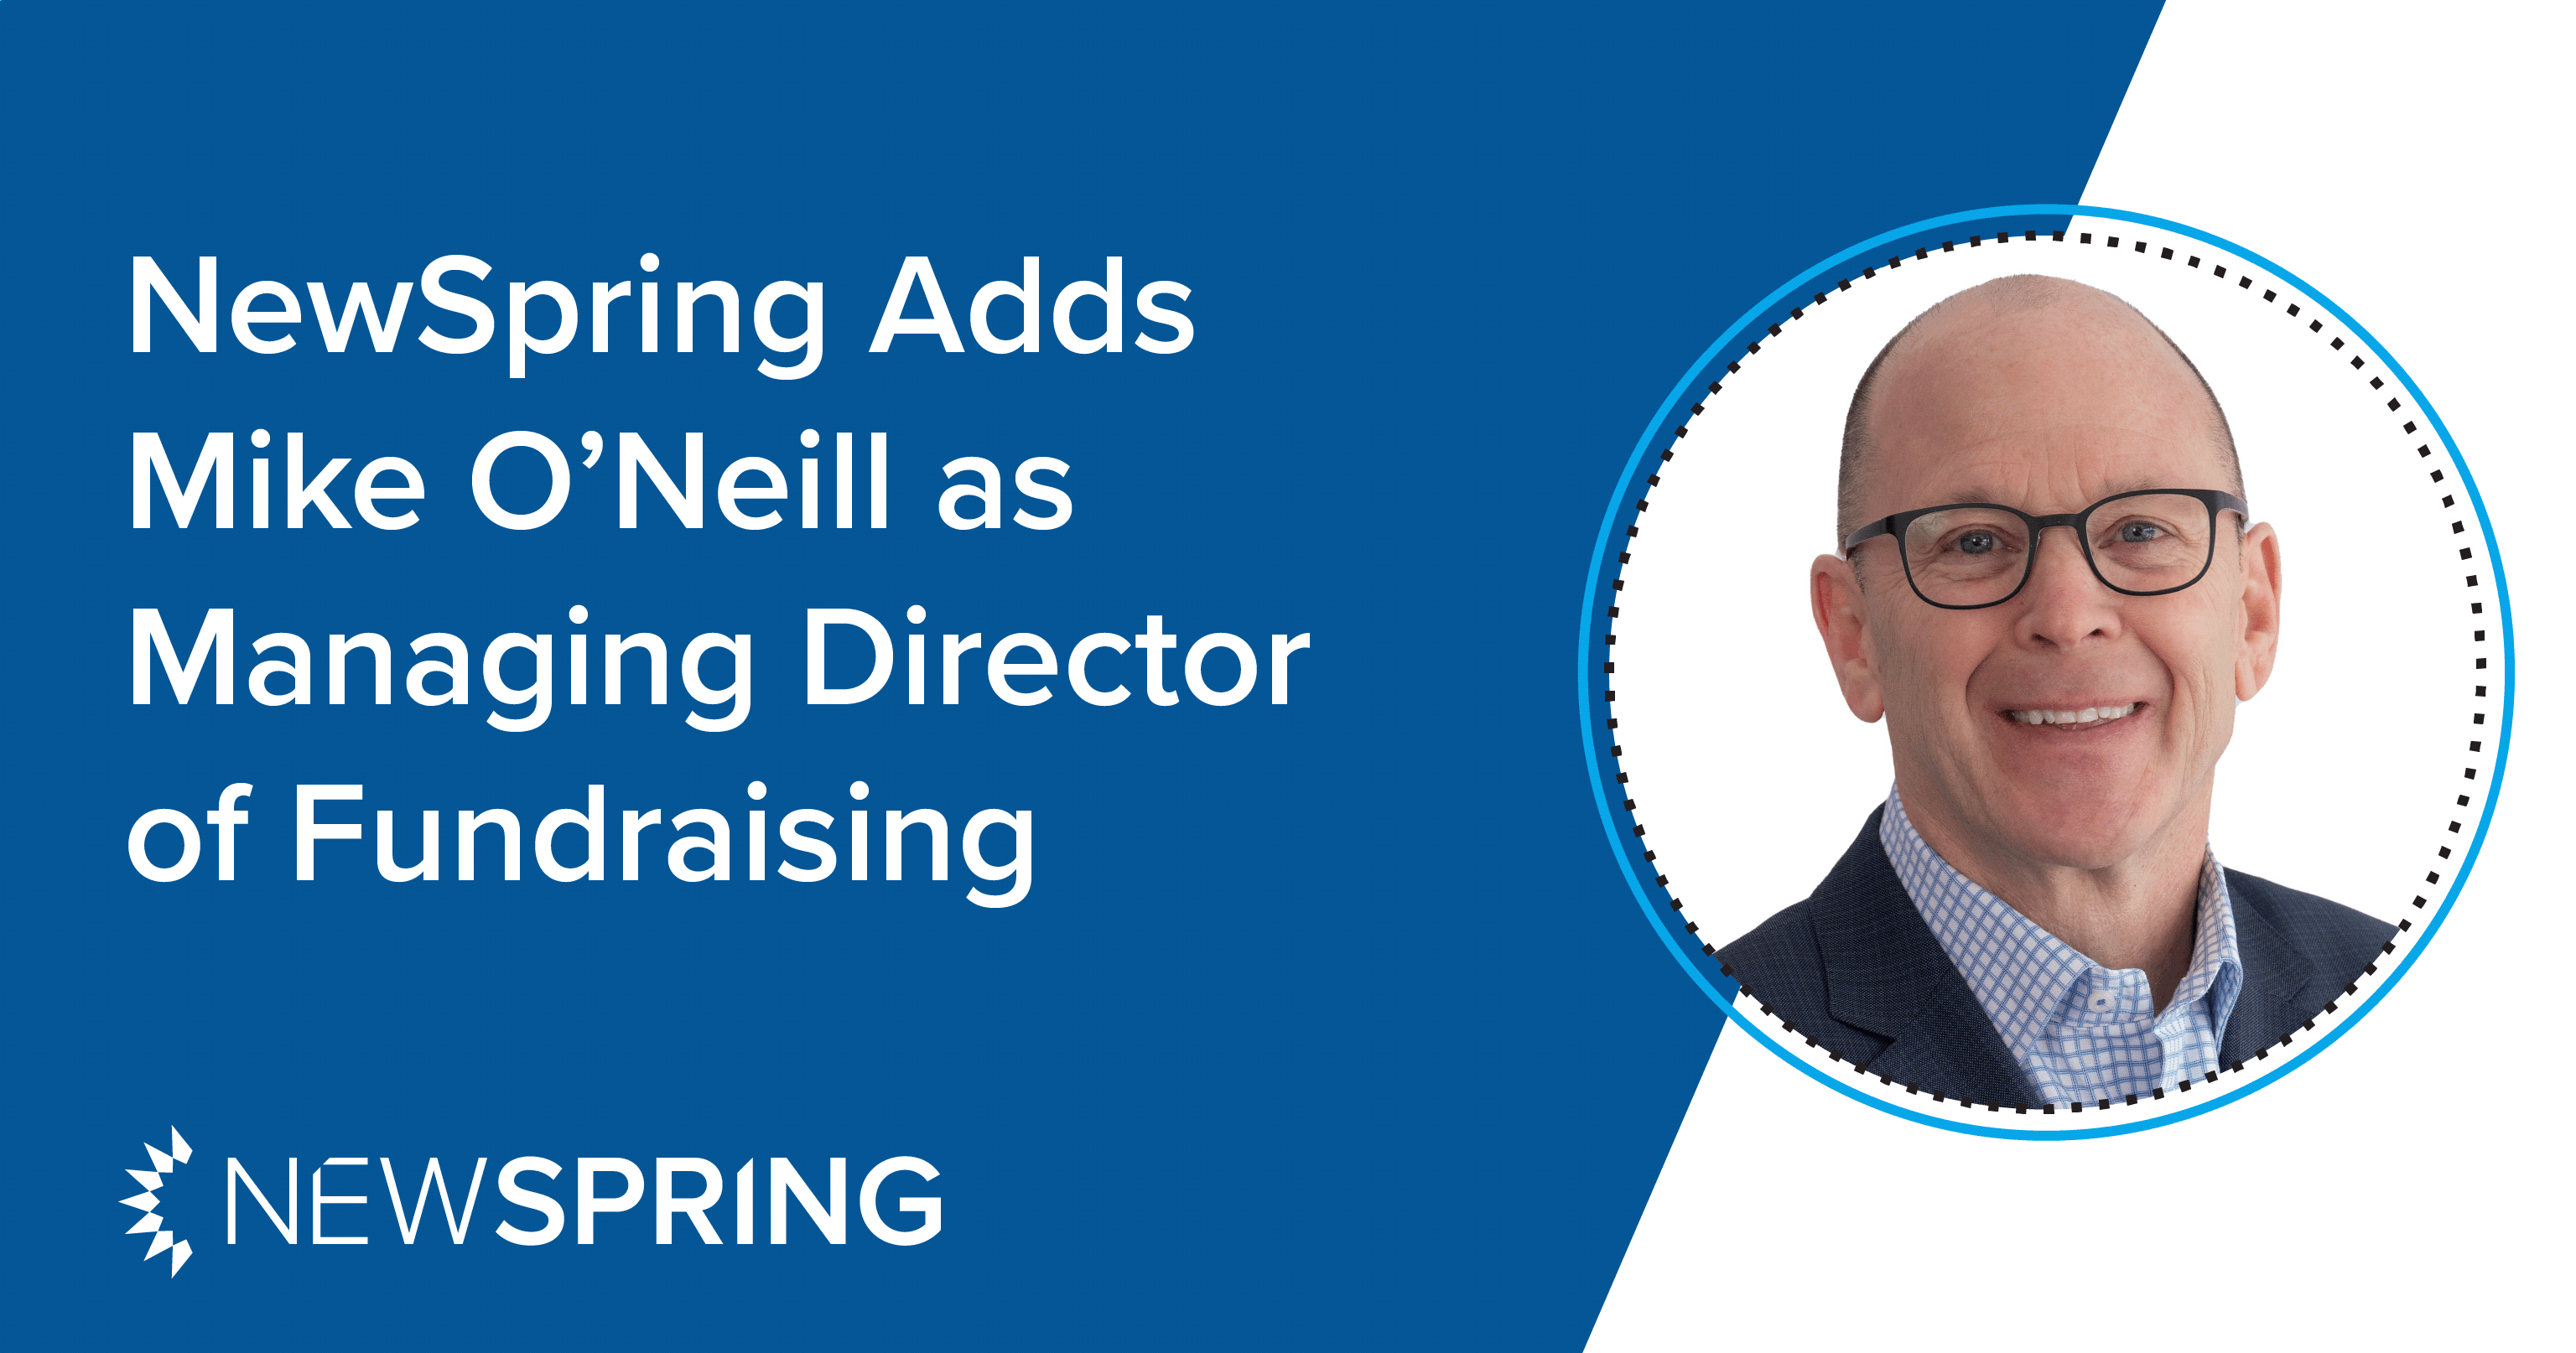 Welcoming Mike O’Neill as Managing Director of Fundraising